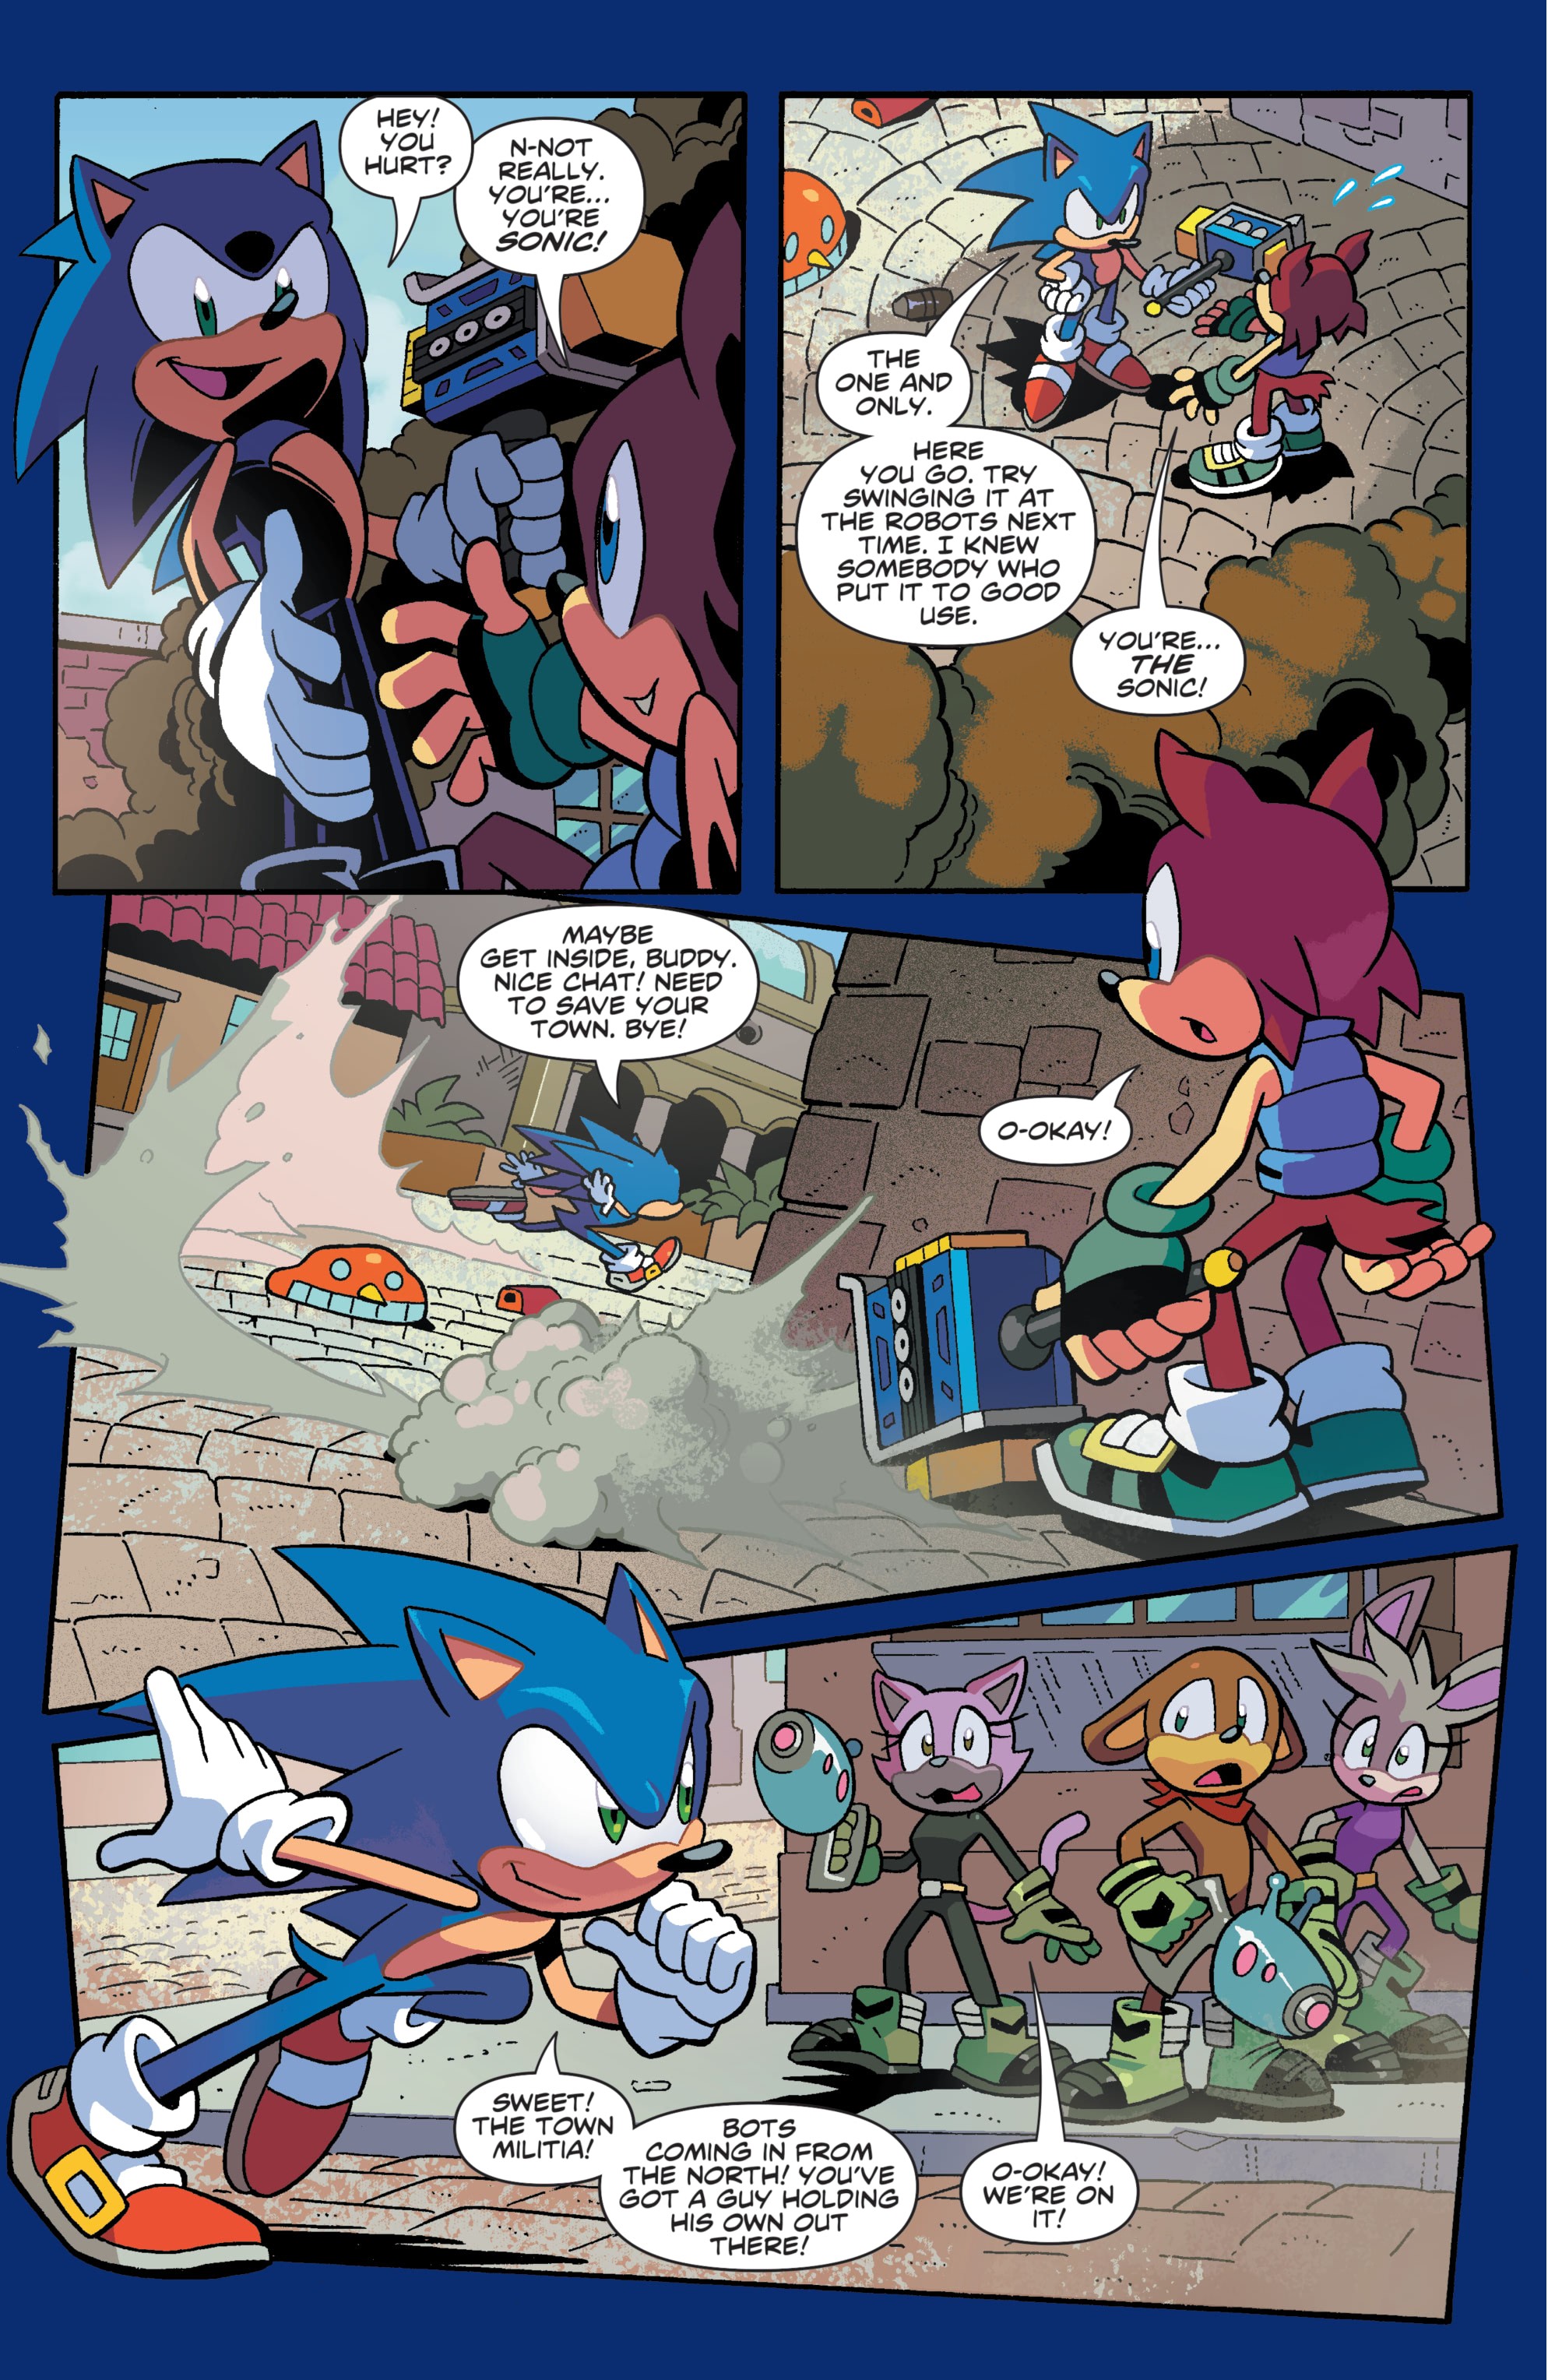 Sonic The Hedgehog: Bad Guys (2020) Chapter 1 - Page 1